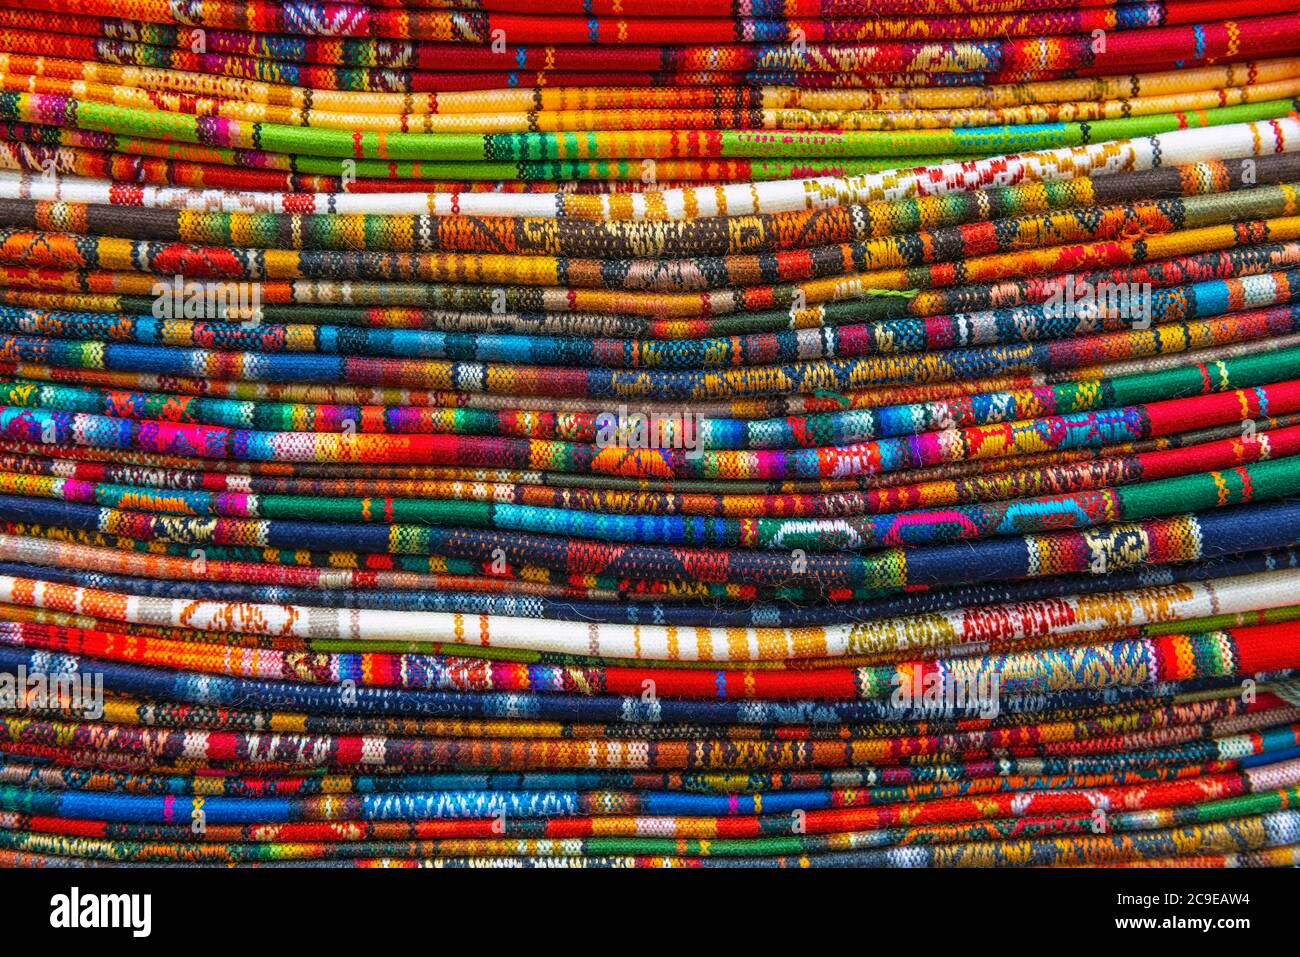 A stack of Andes Textiles on a local handicraft market, Cusco, Peru. Stock Photo